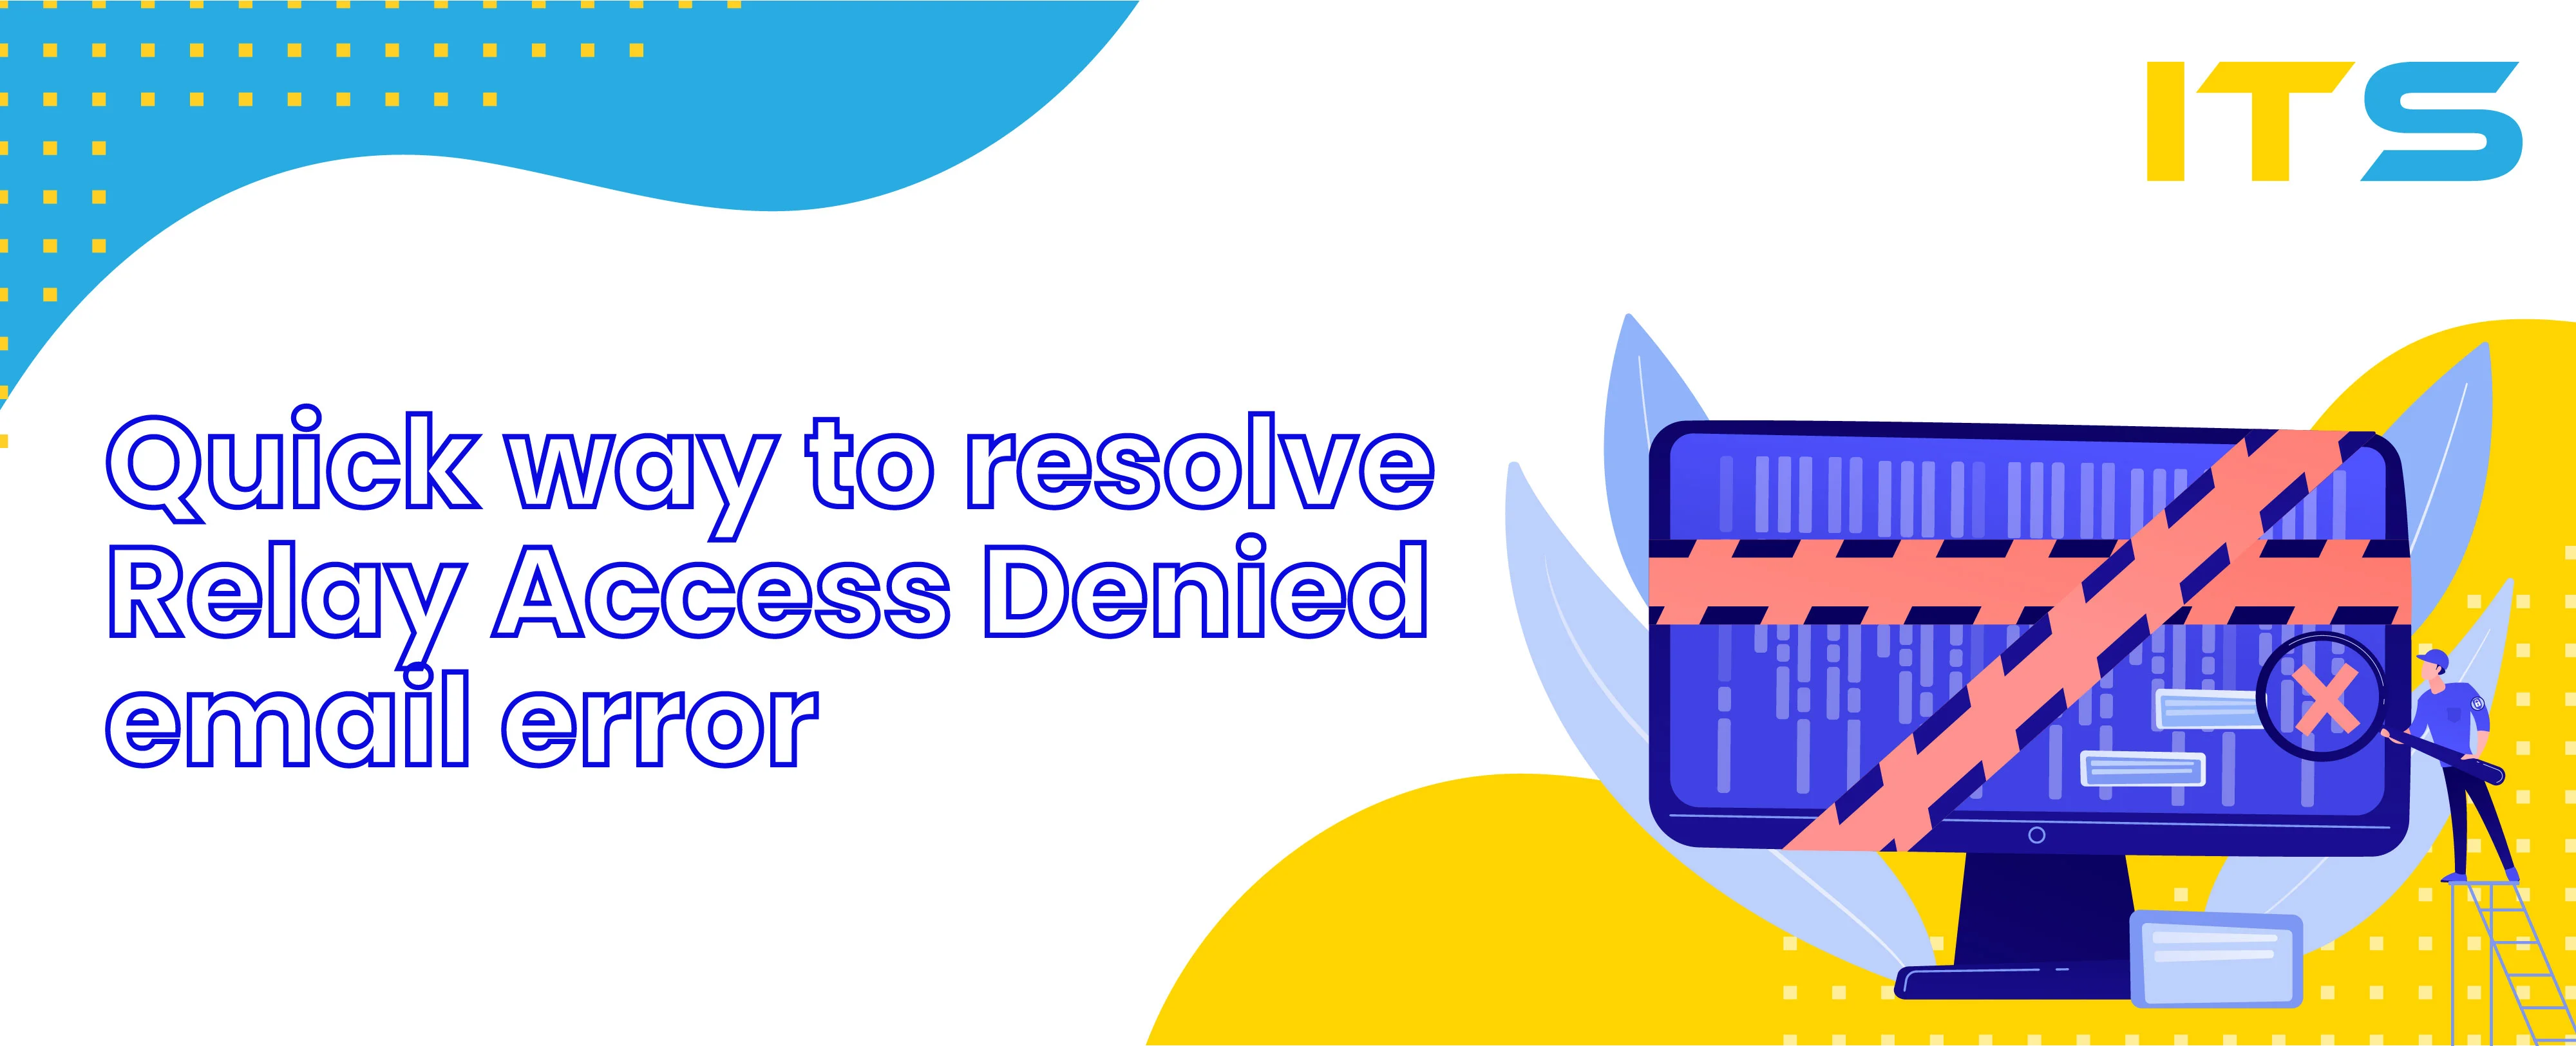 Quick way to resolve Relay Access Denied email error